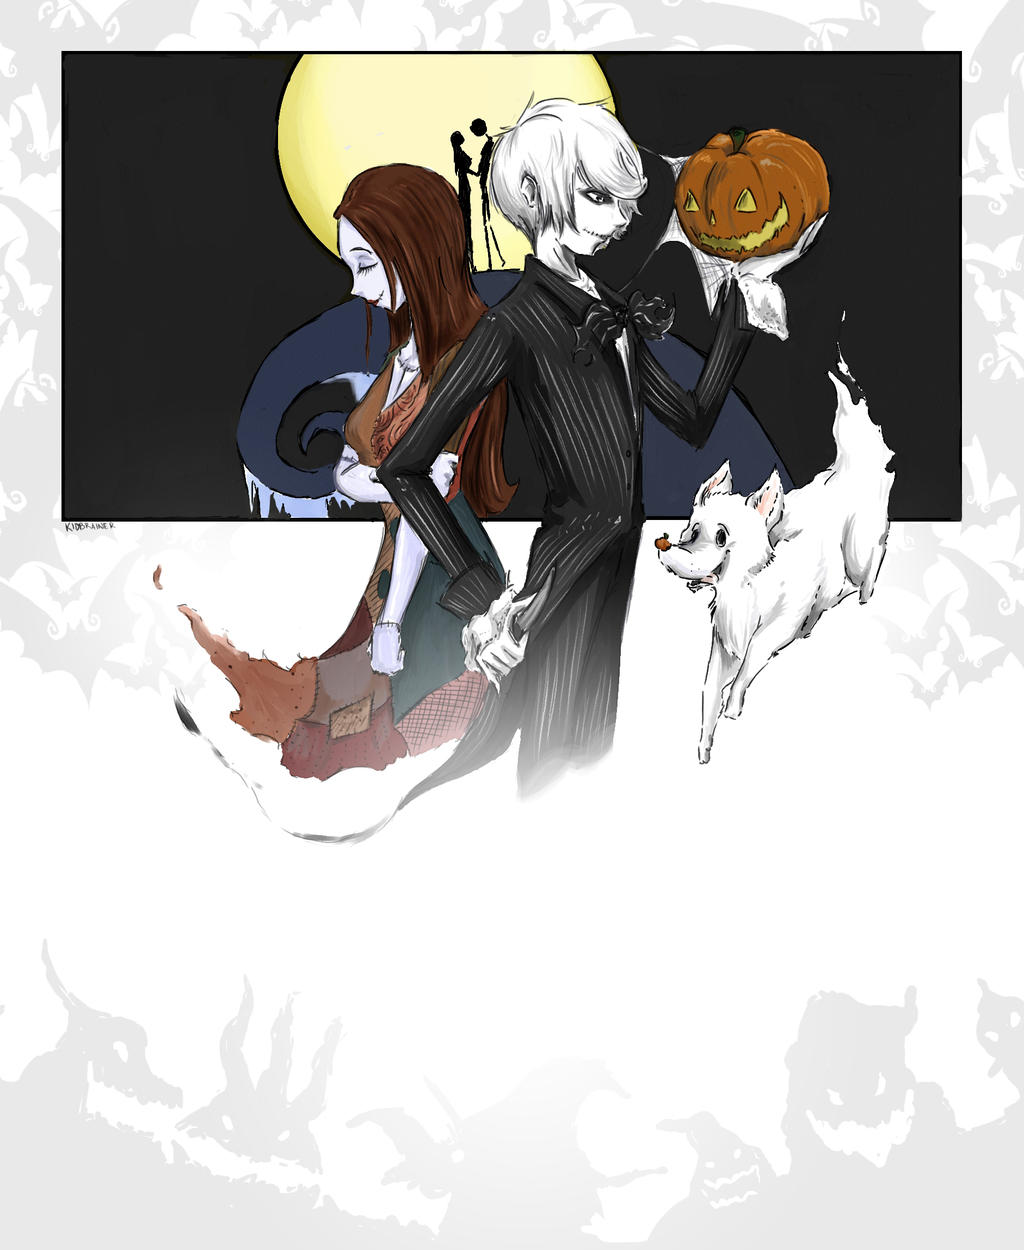 The Nightmare Before Christmas by kidbrainer on DeviantArt